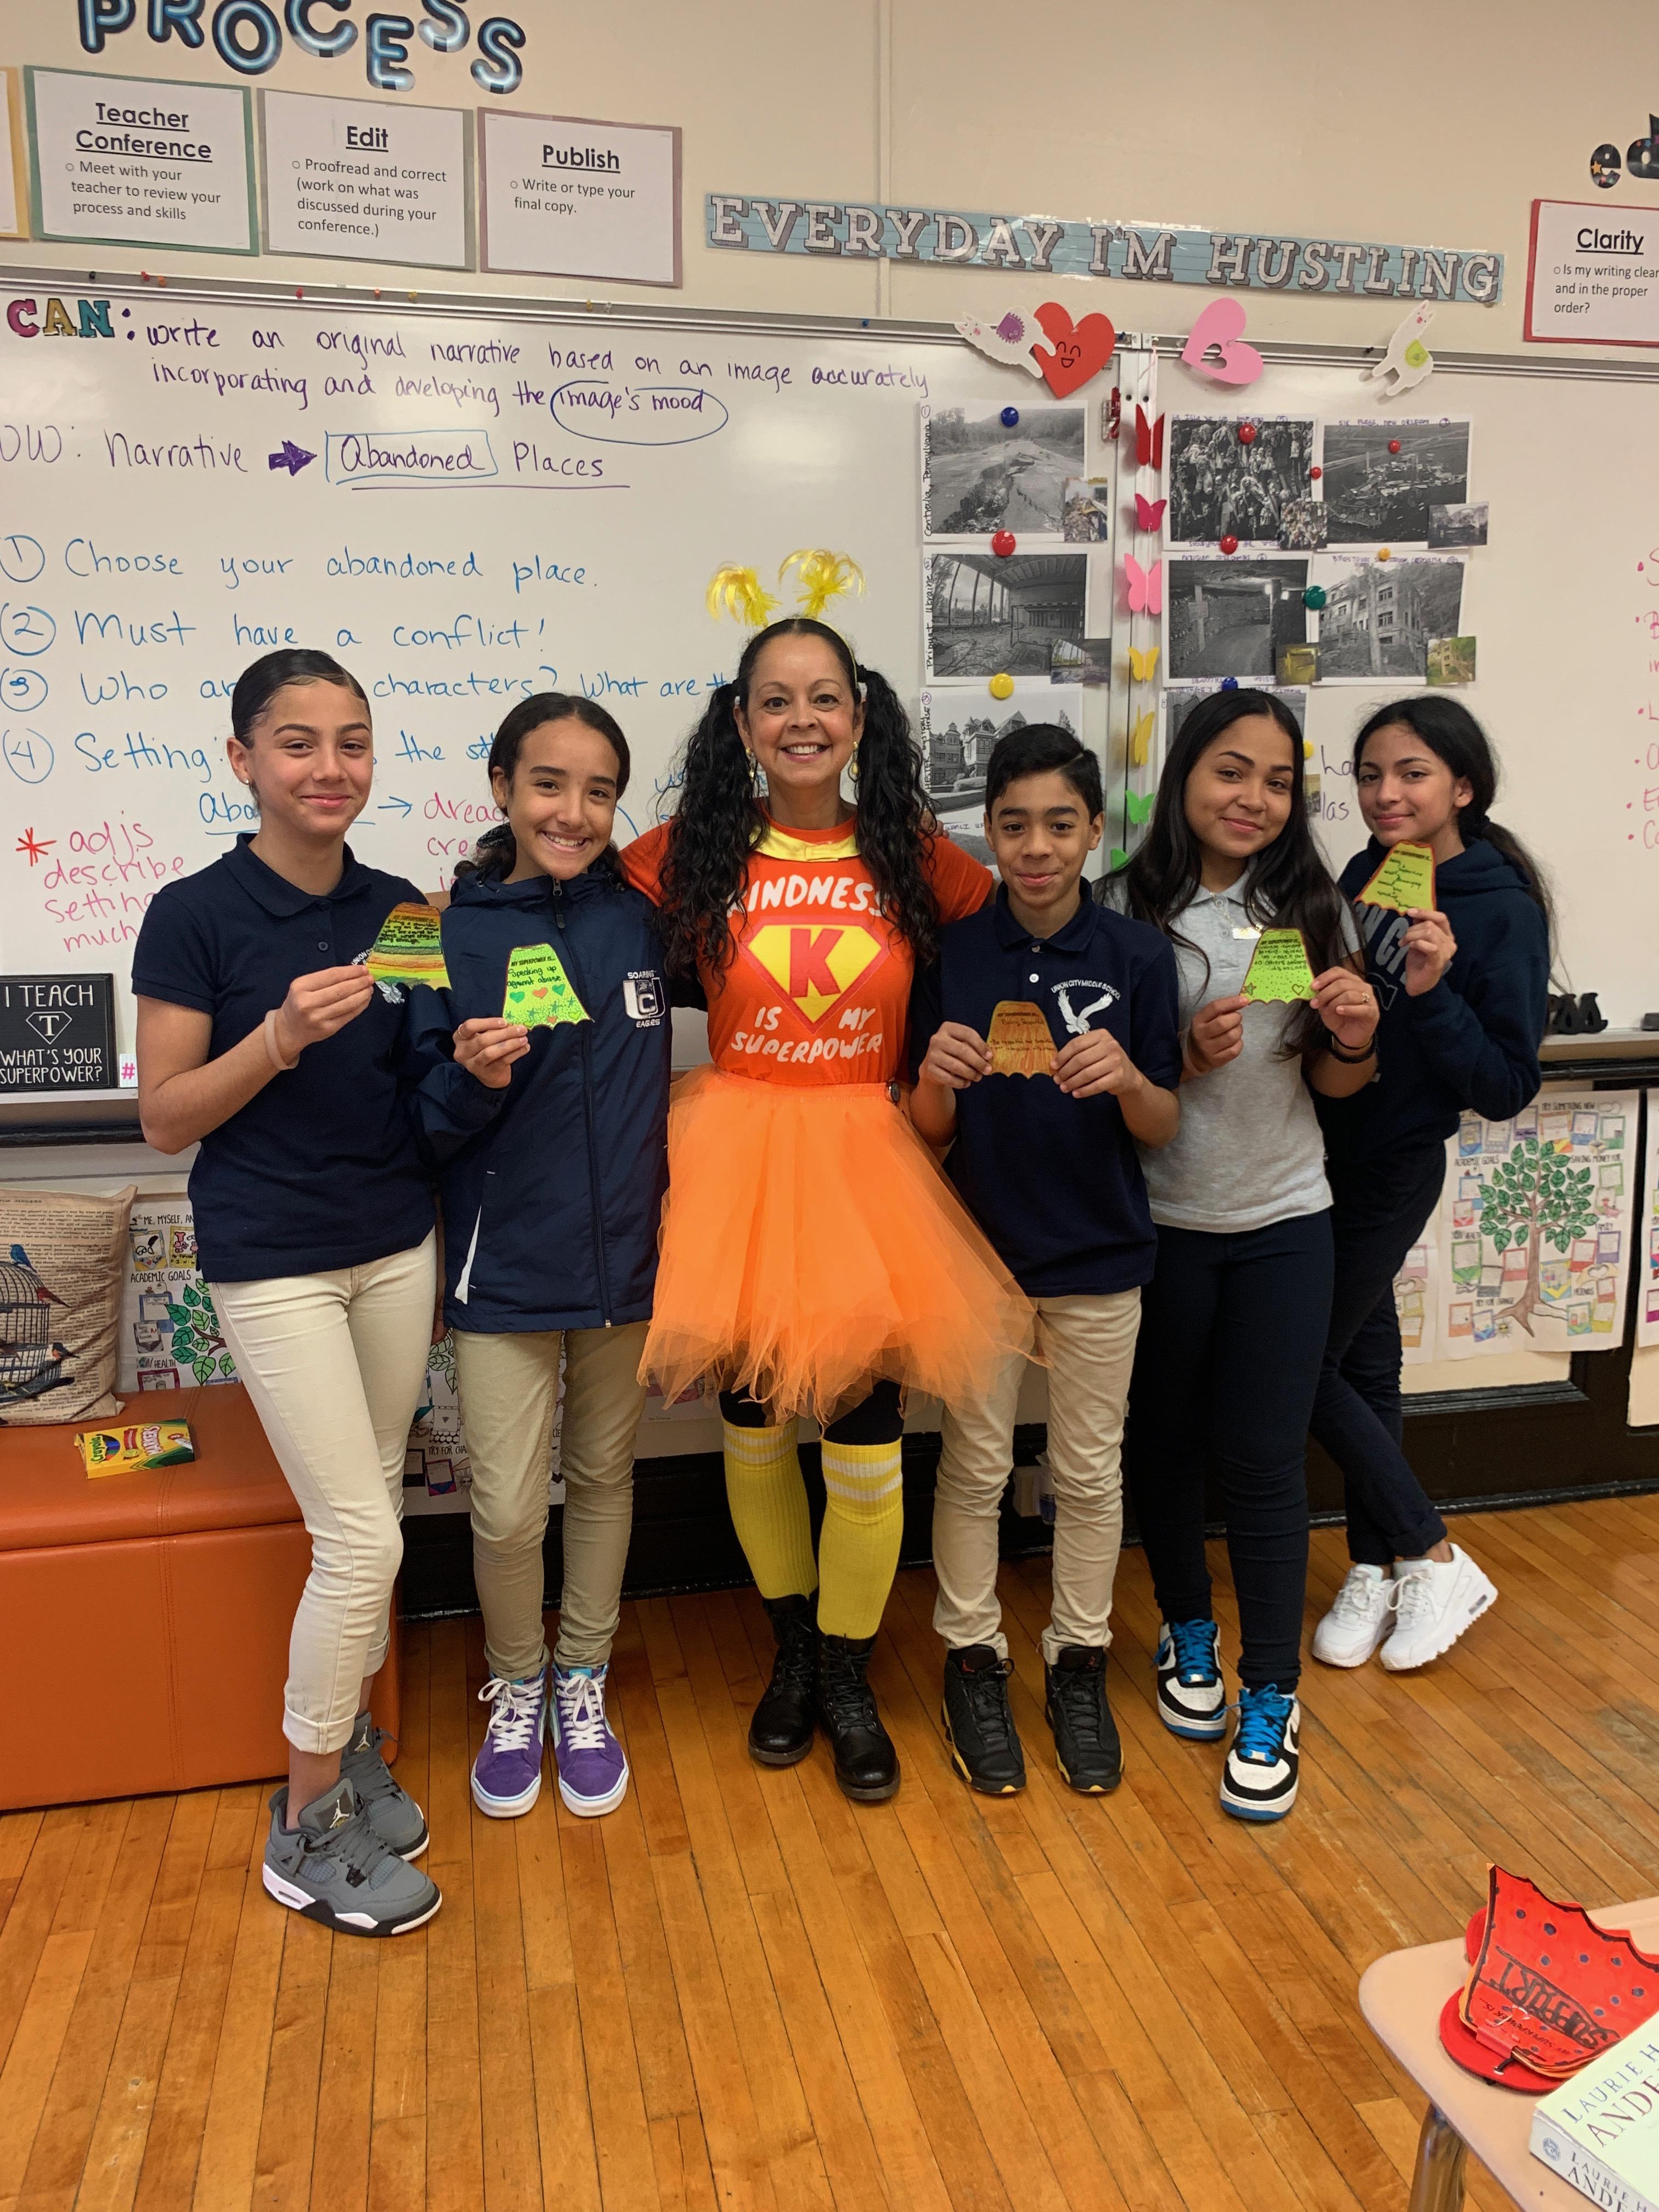 Ms. Garcia dressed as Kindness Superwoman with four girls holding their paper capes and one boy side by side